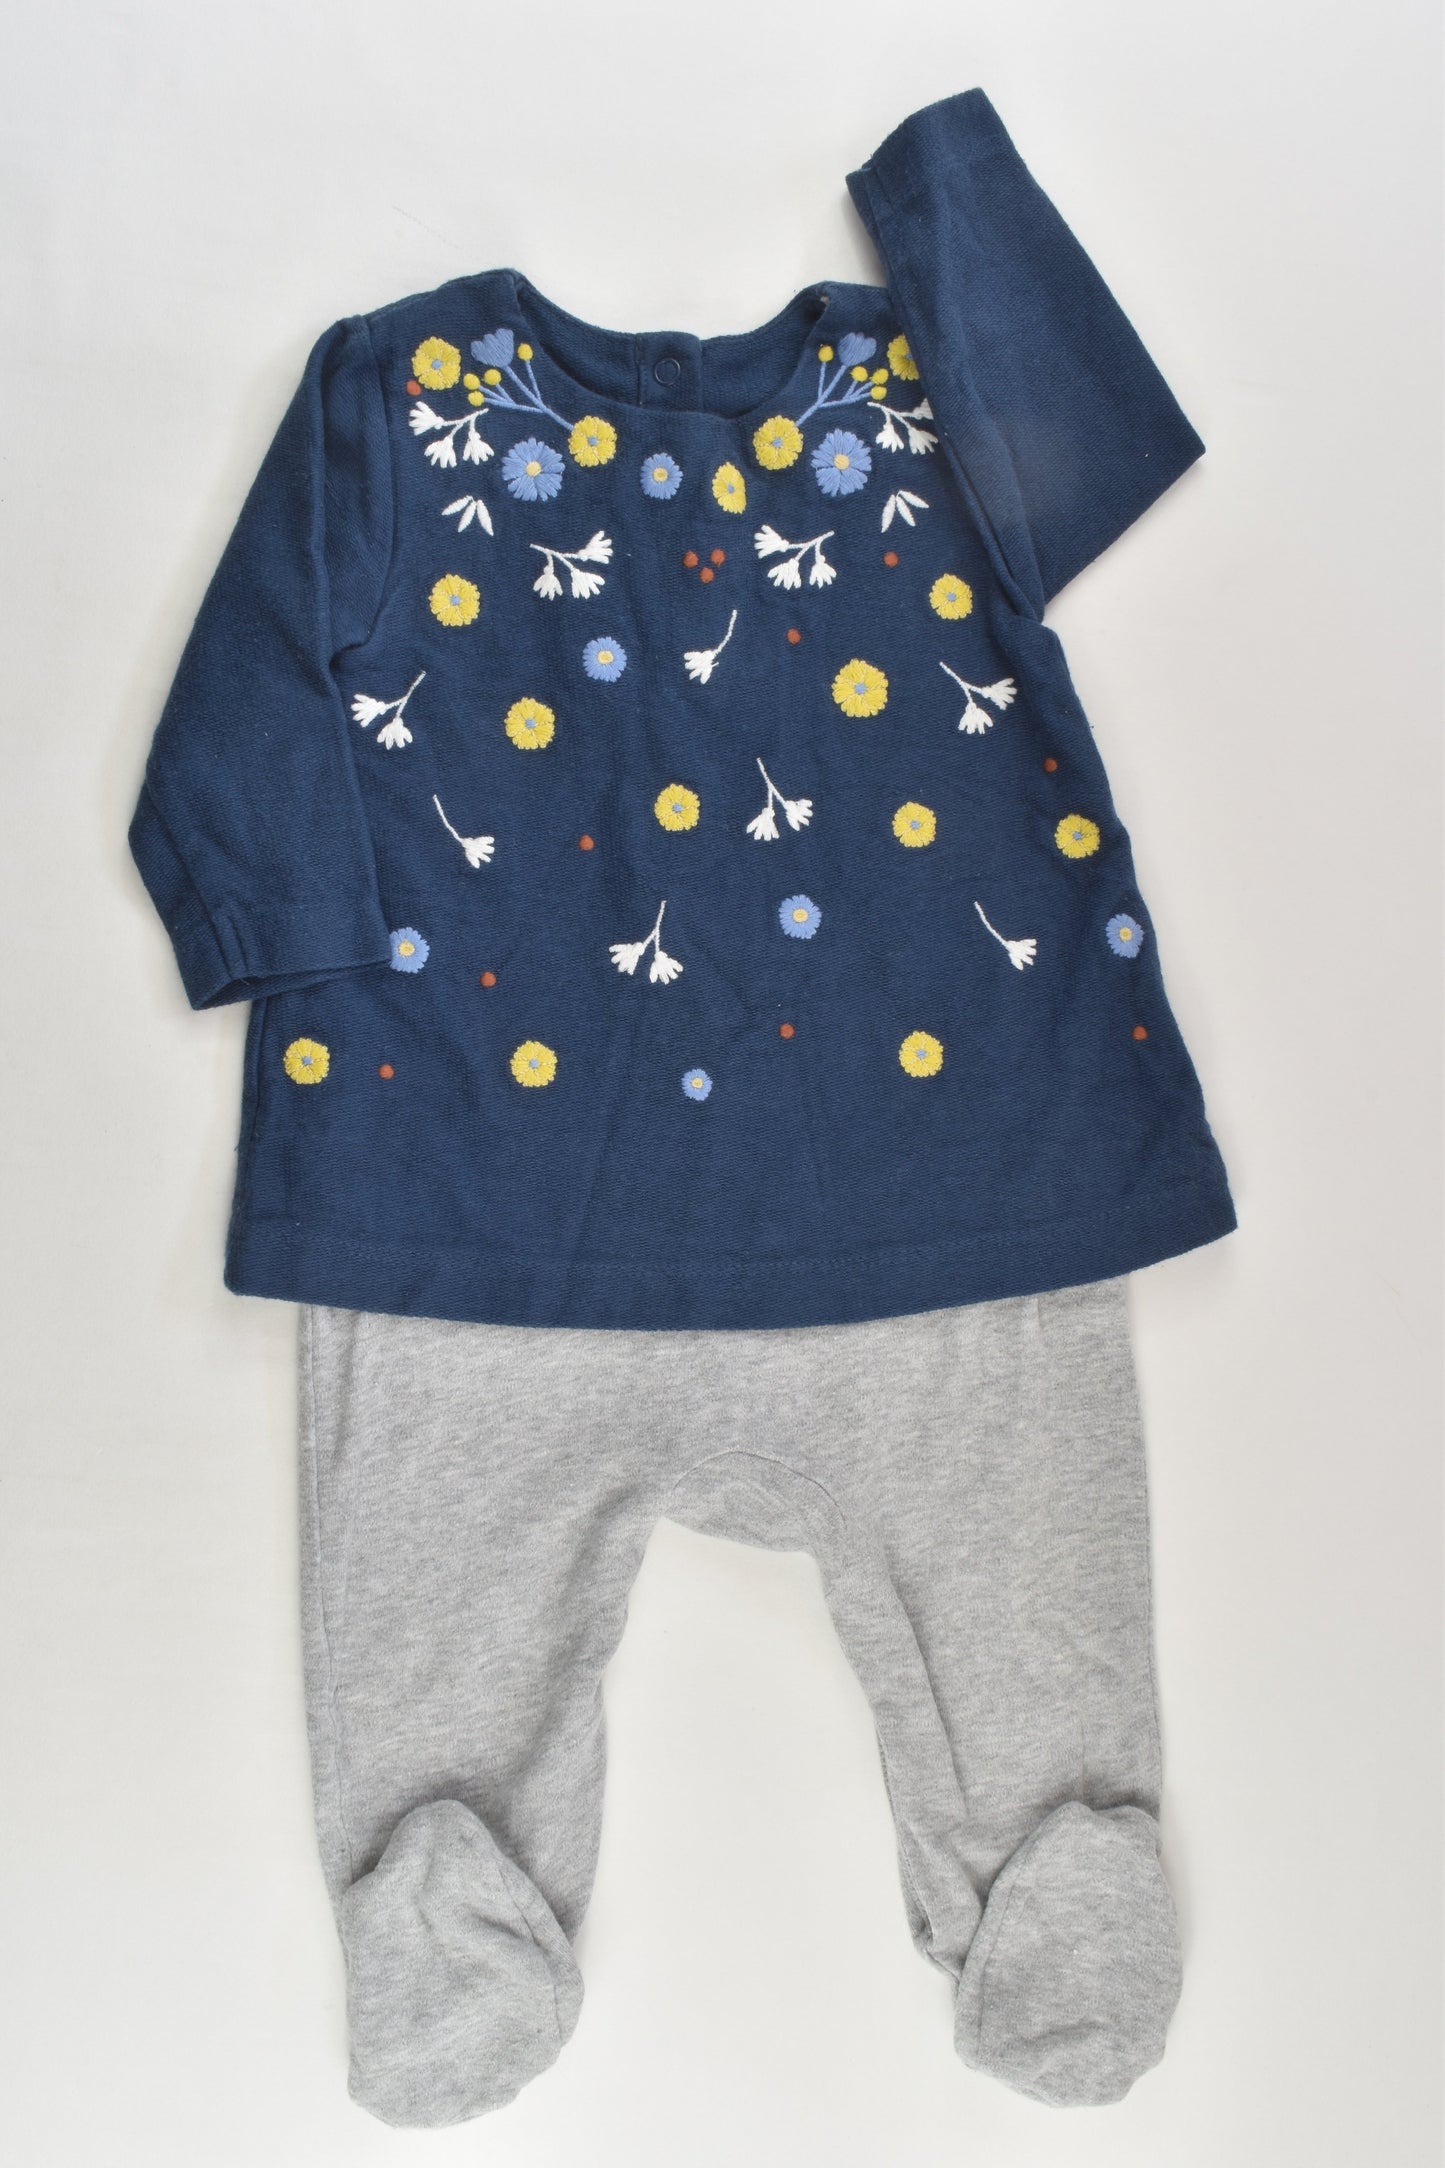 Mothercare Size 0 (6-9 months) Outfit